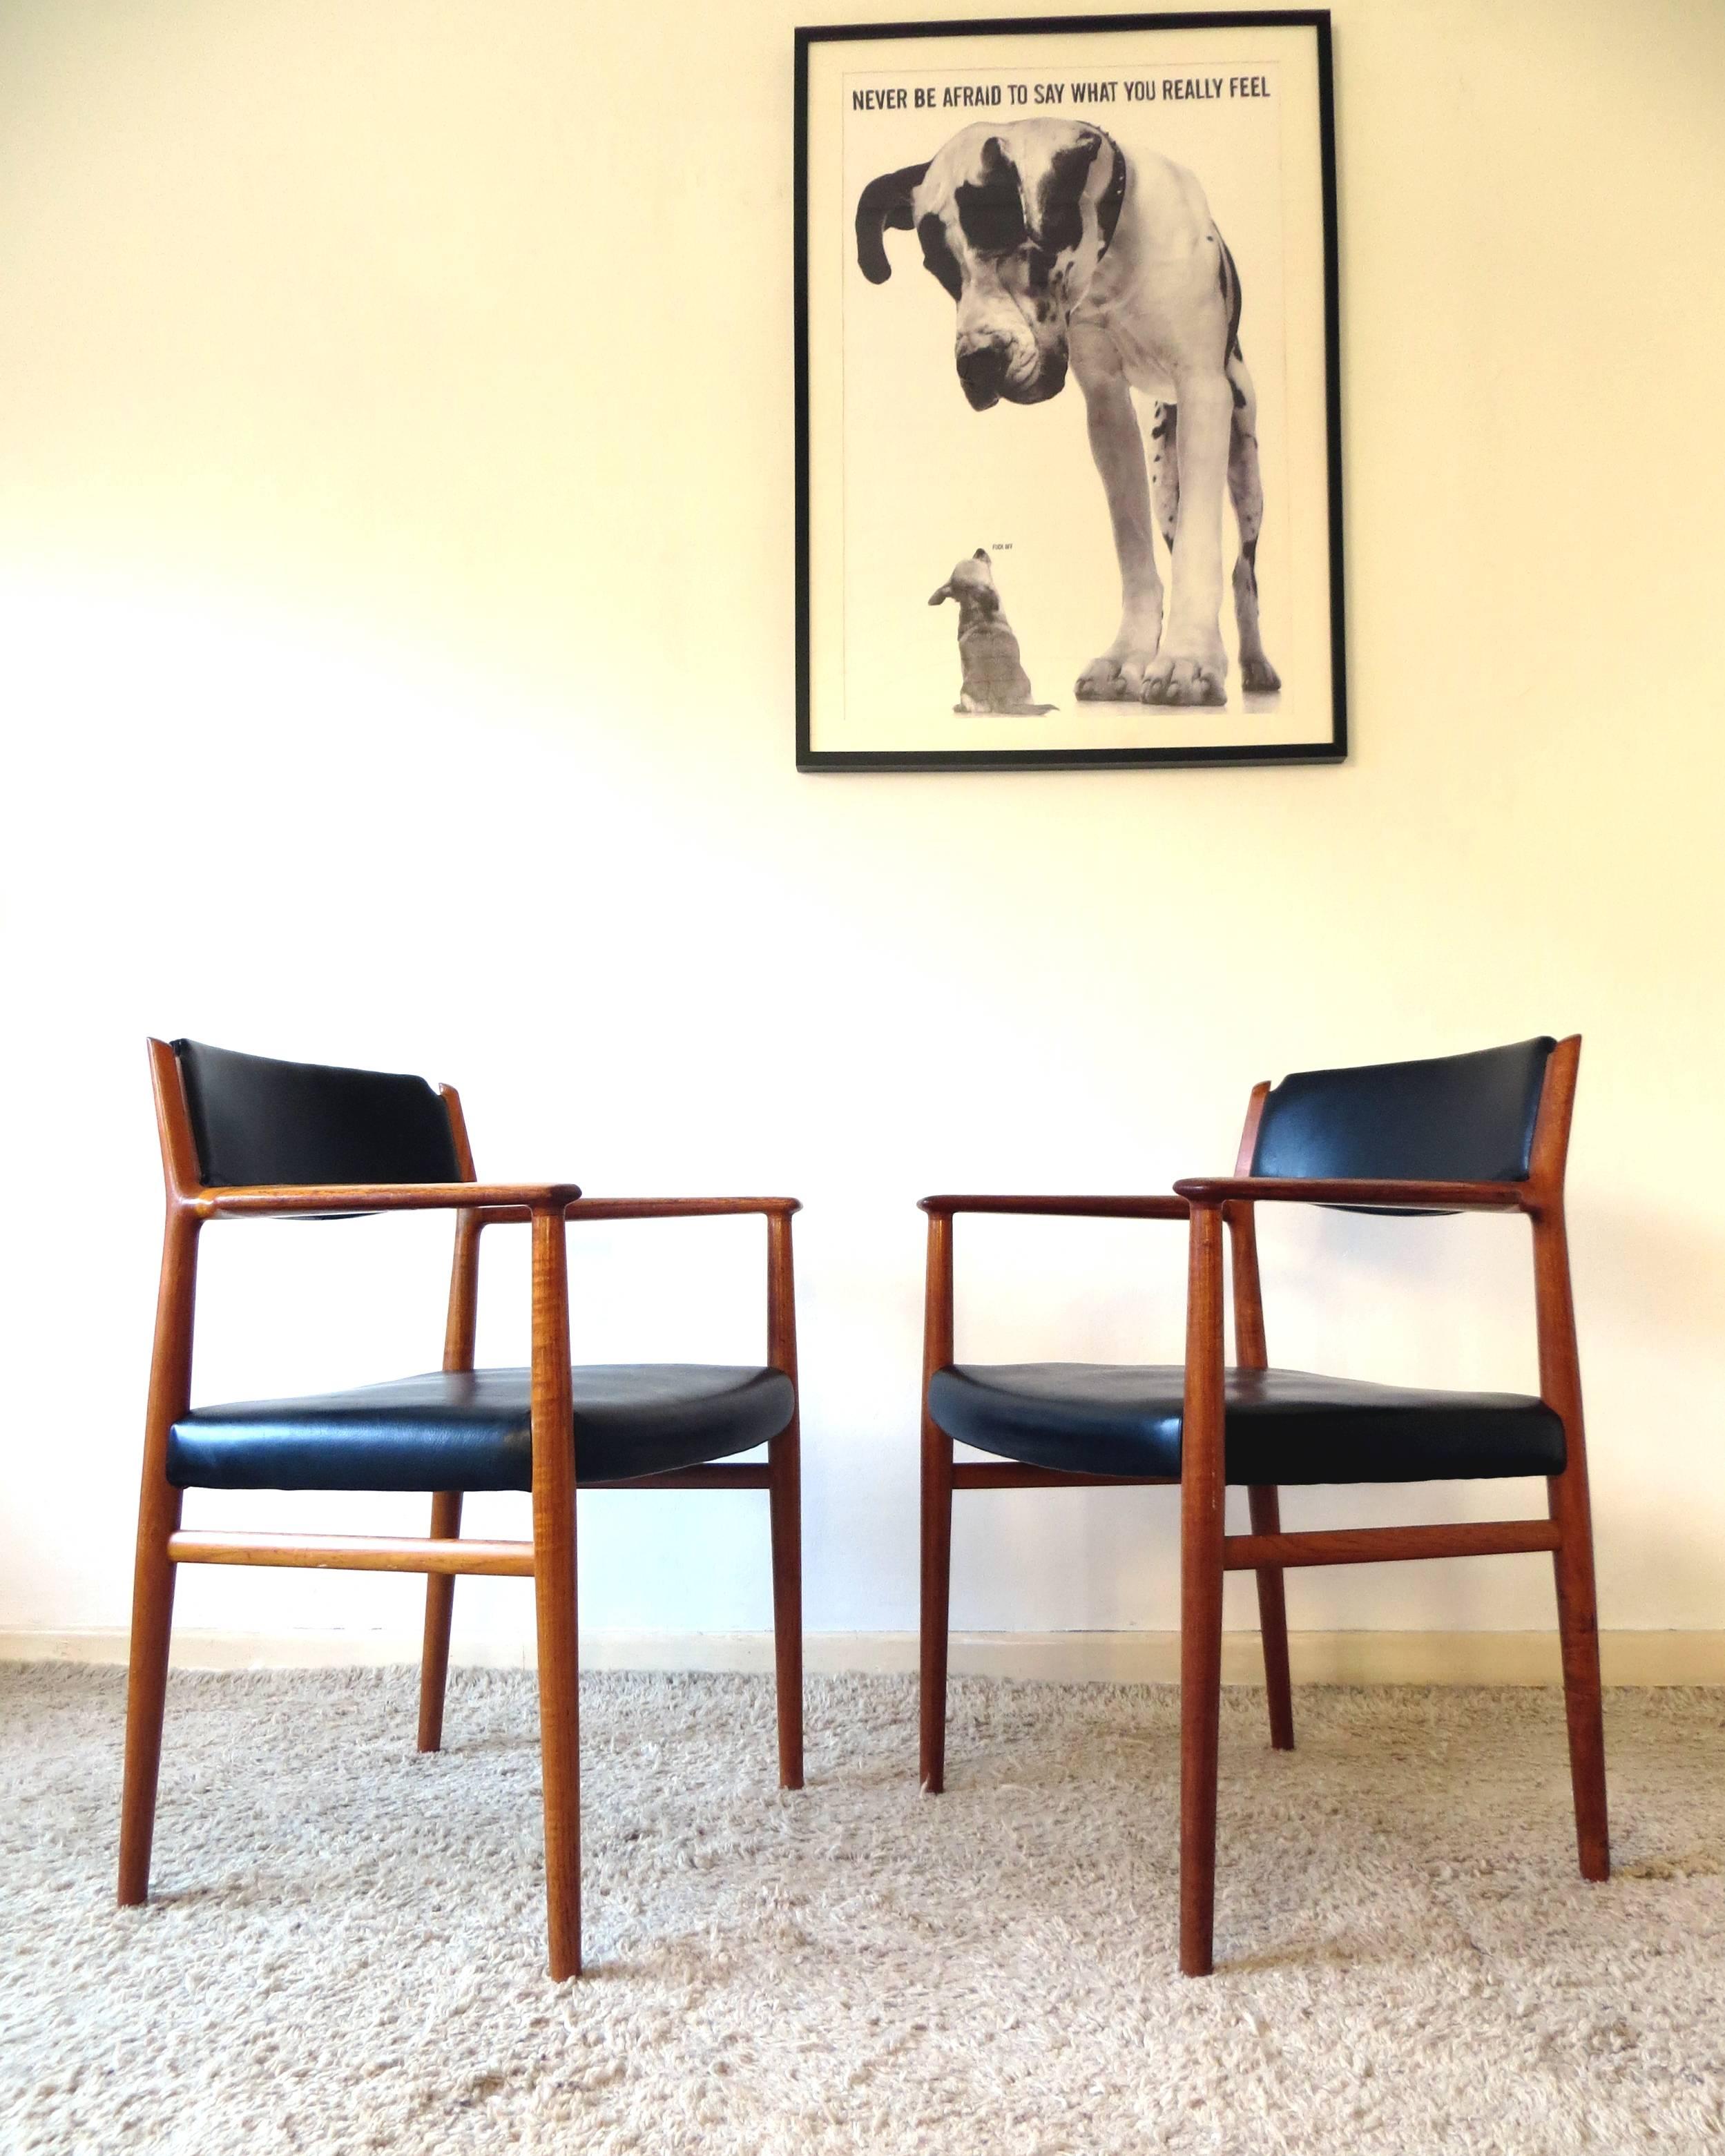 Denmark Scandinavian modern design classics armchairs from the 1960s in highest quality from the renowned cabinetmaker Sibast model 418 by the coveted designer Arne Vodder. Danish Mid-Century Mordern finest objects.
Special features are the organic